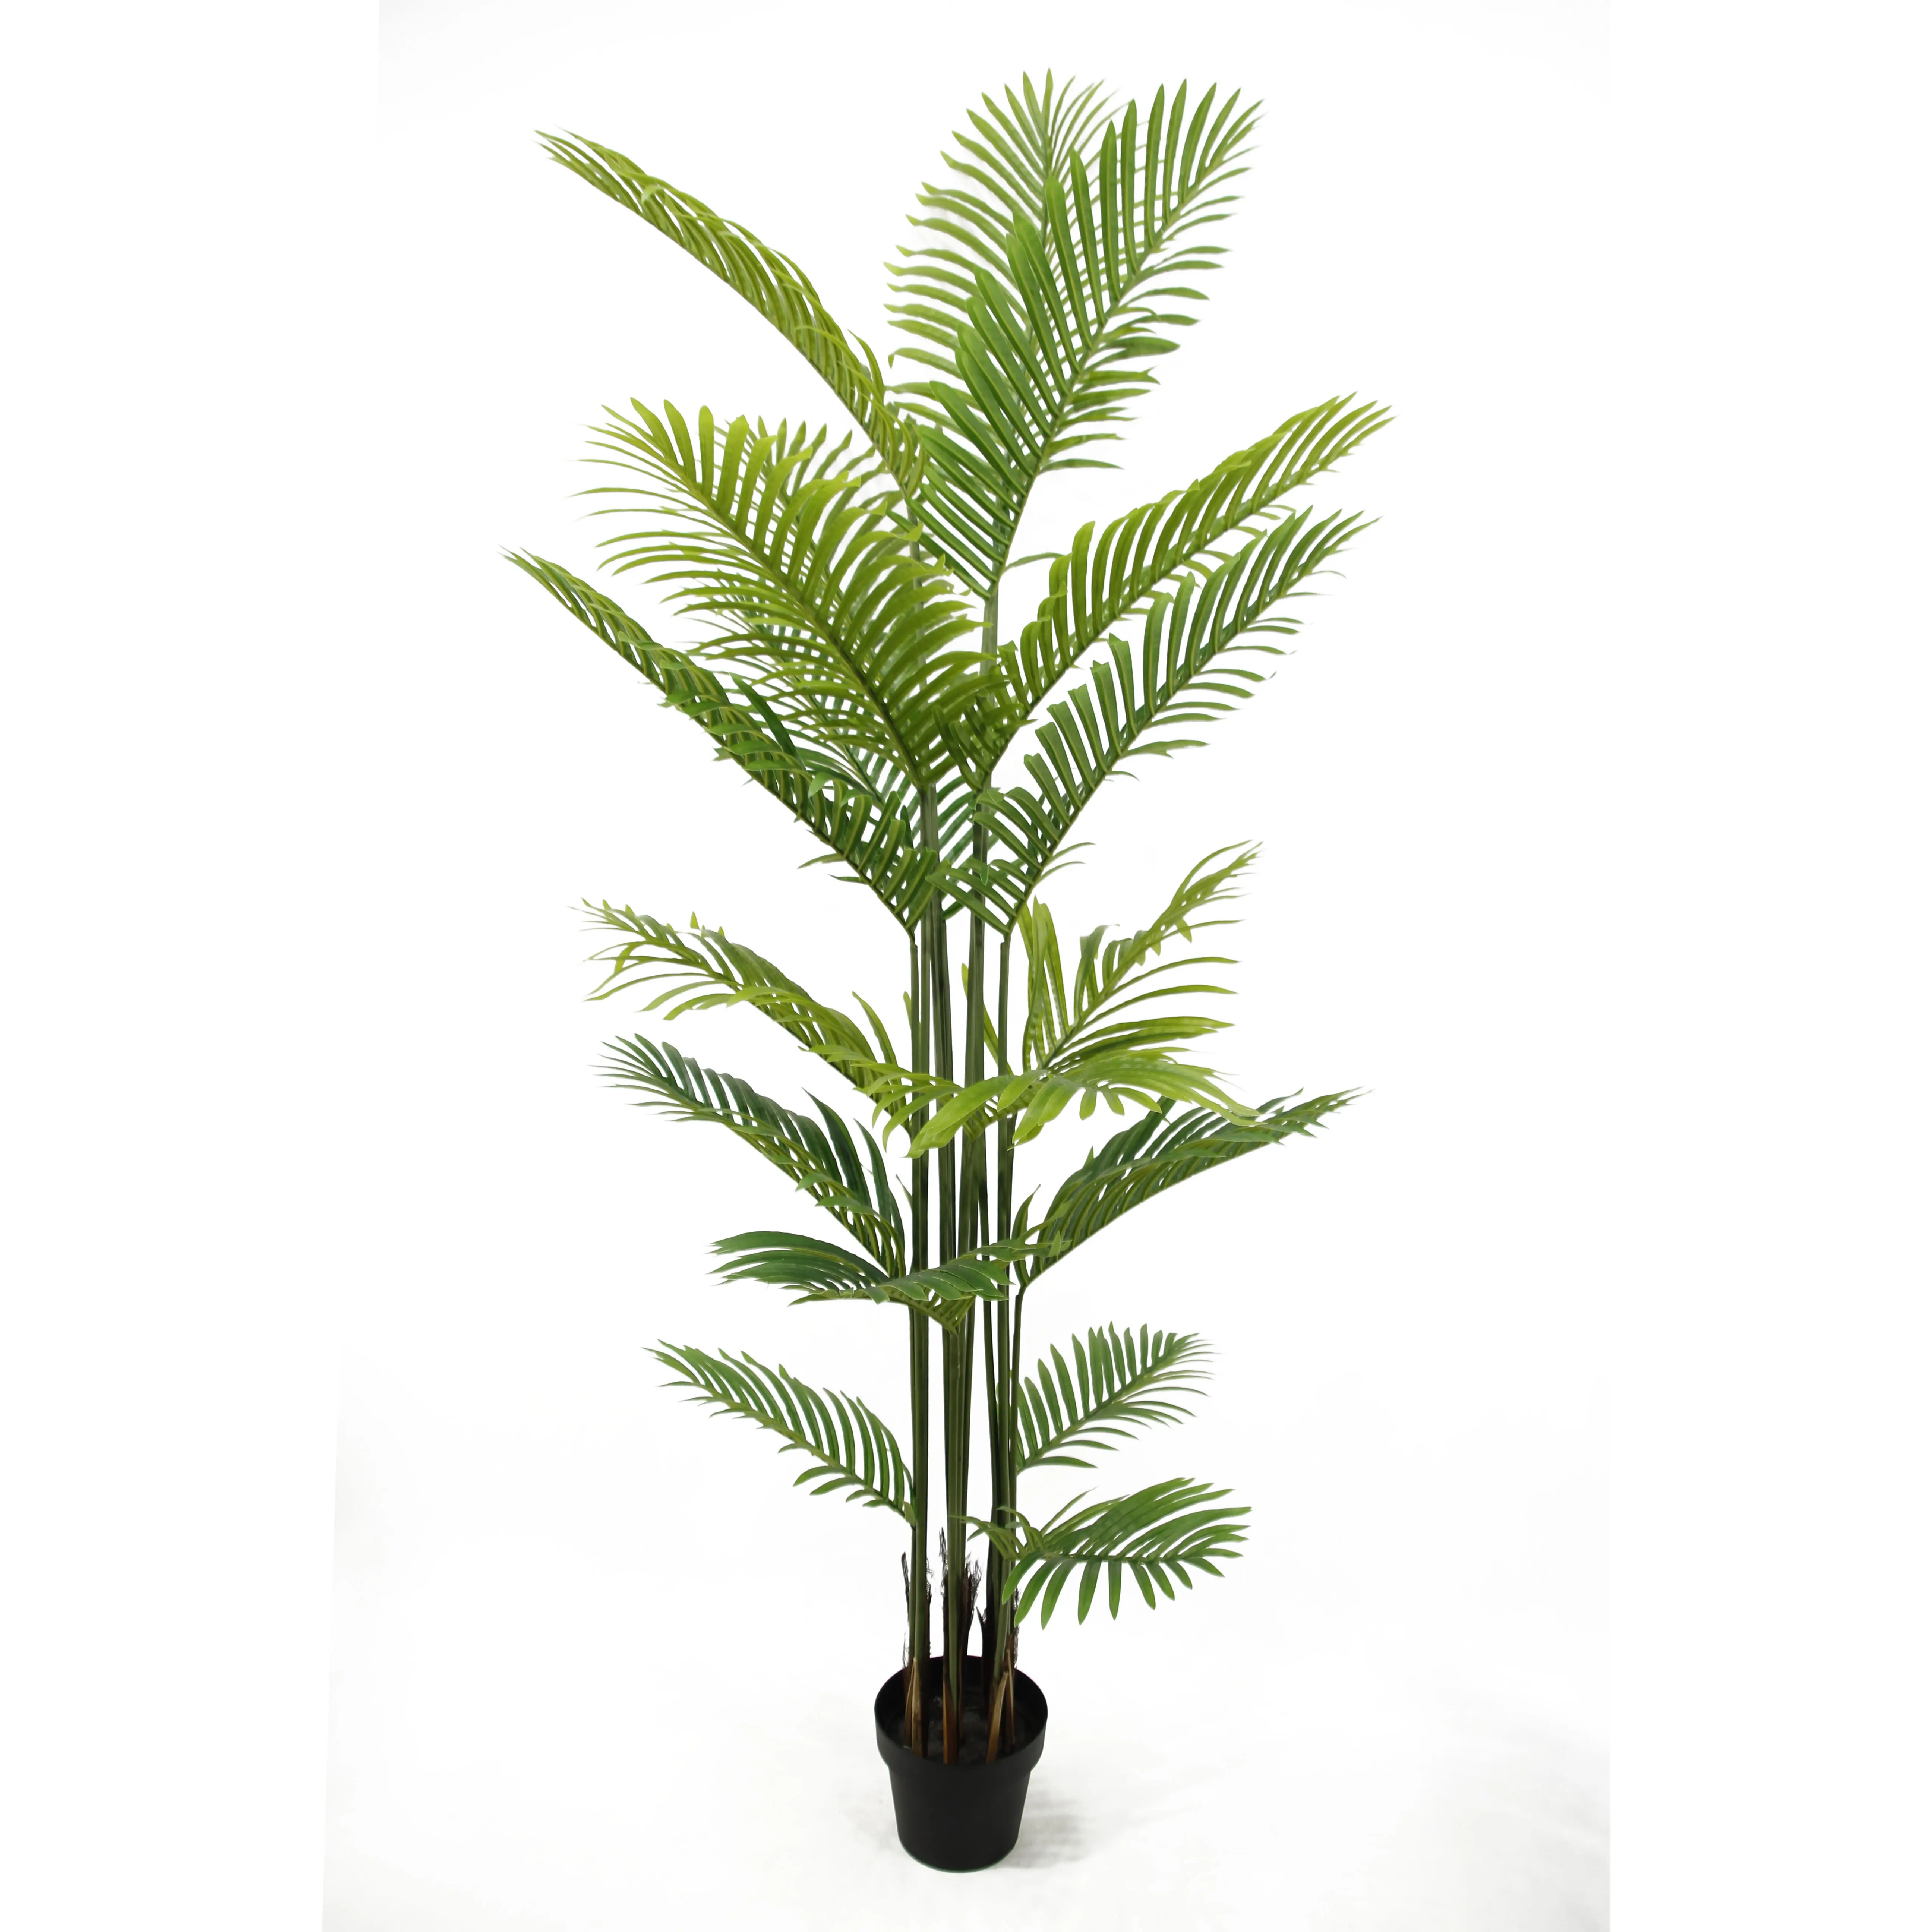 Artificial UV Proof Areca Palm Trees with pots for outdoor indoor decorative plants artificial palm trees